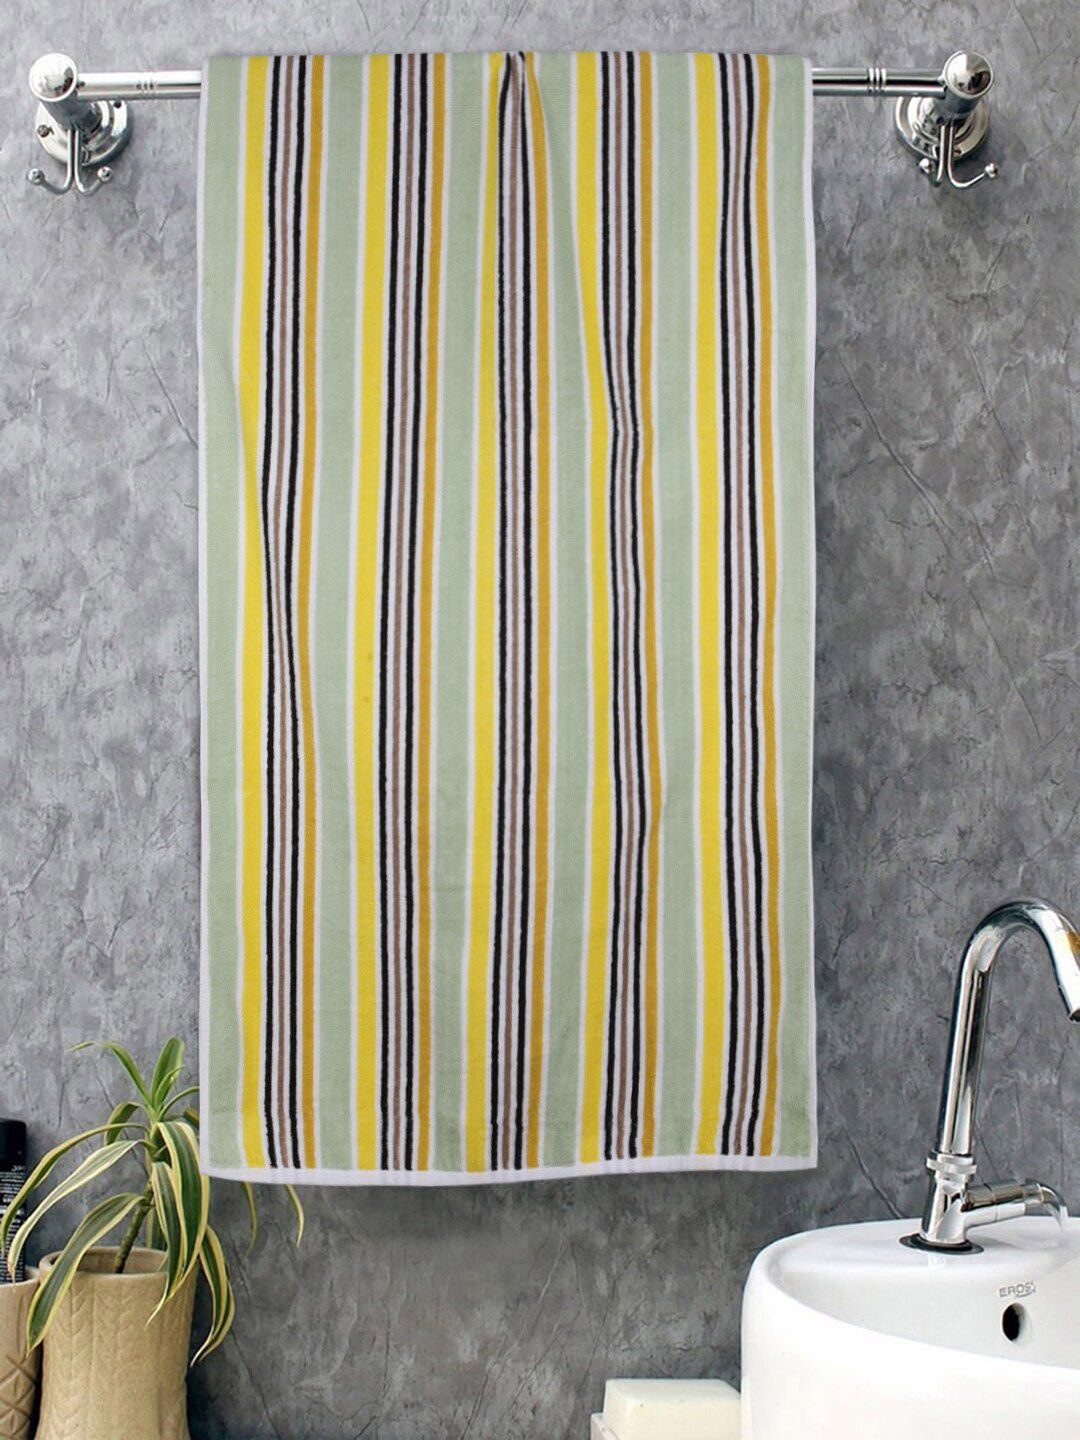 ROMEE Green Striped 500 GSM Cotton Bath Towel Price in India